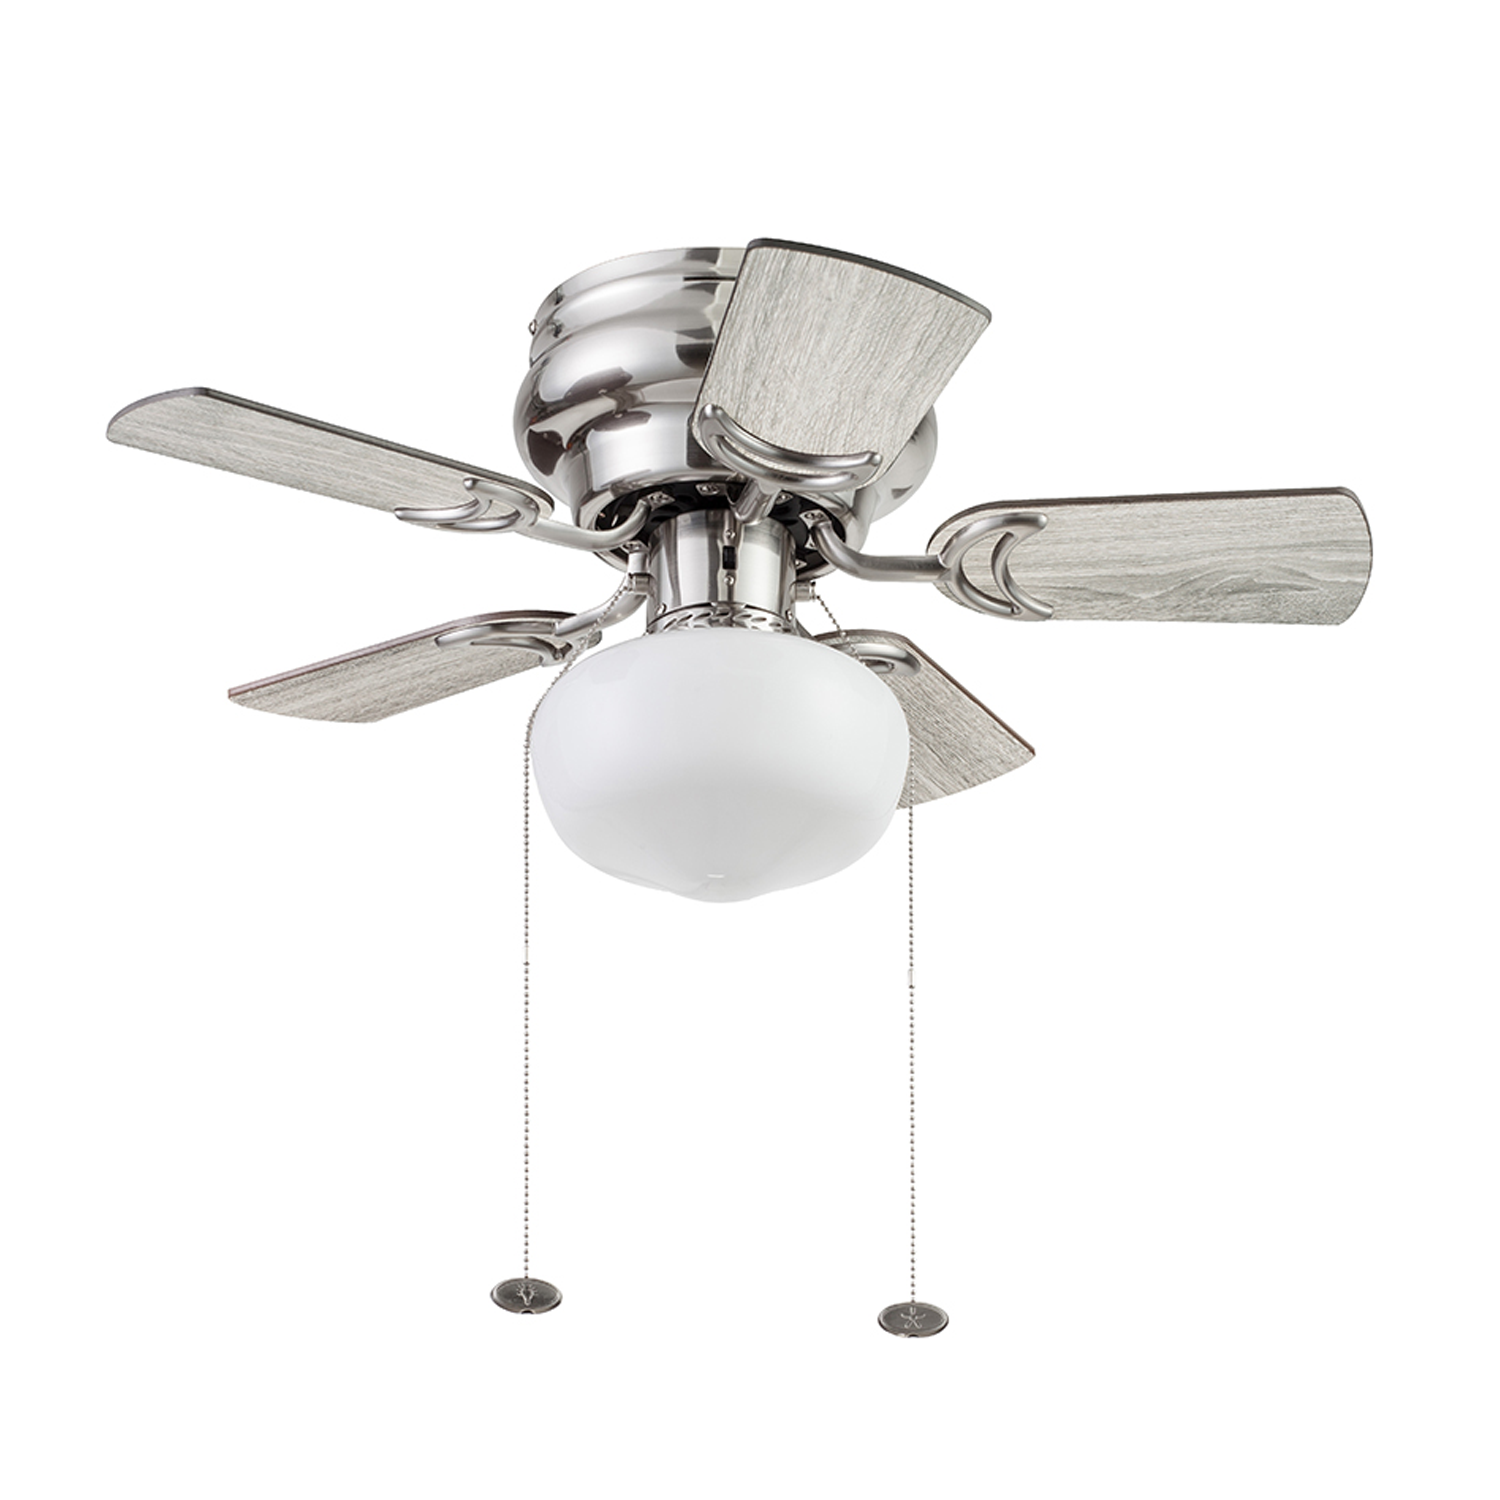 28 Inch Hero, Brushed Nickel, Pull Chain, Ceiling Fan by Prominence Home